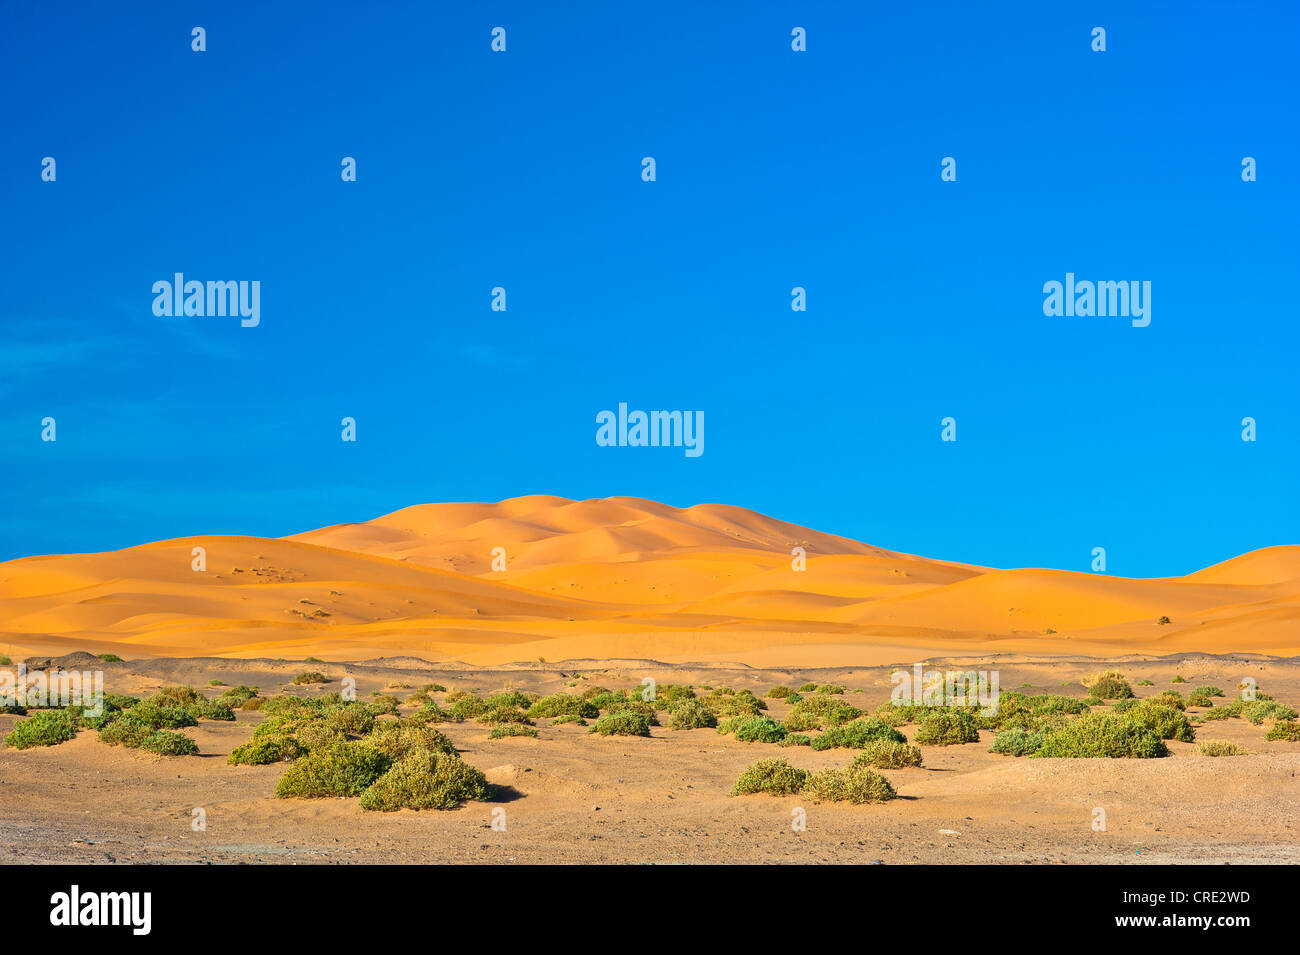 Sand dunes of Erg Chebbi, cushion plants in the foreground, Sahara, southern Morocco, Africa Stock Photo